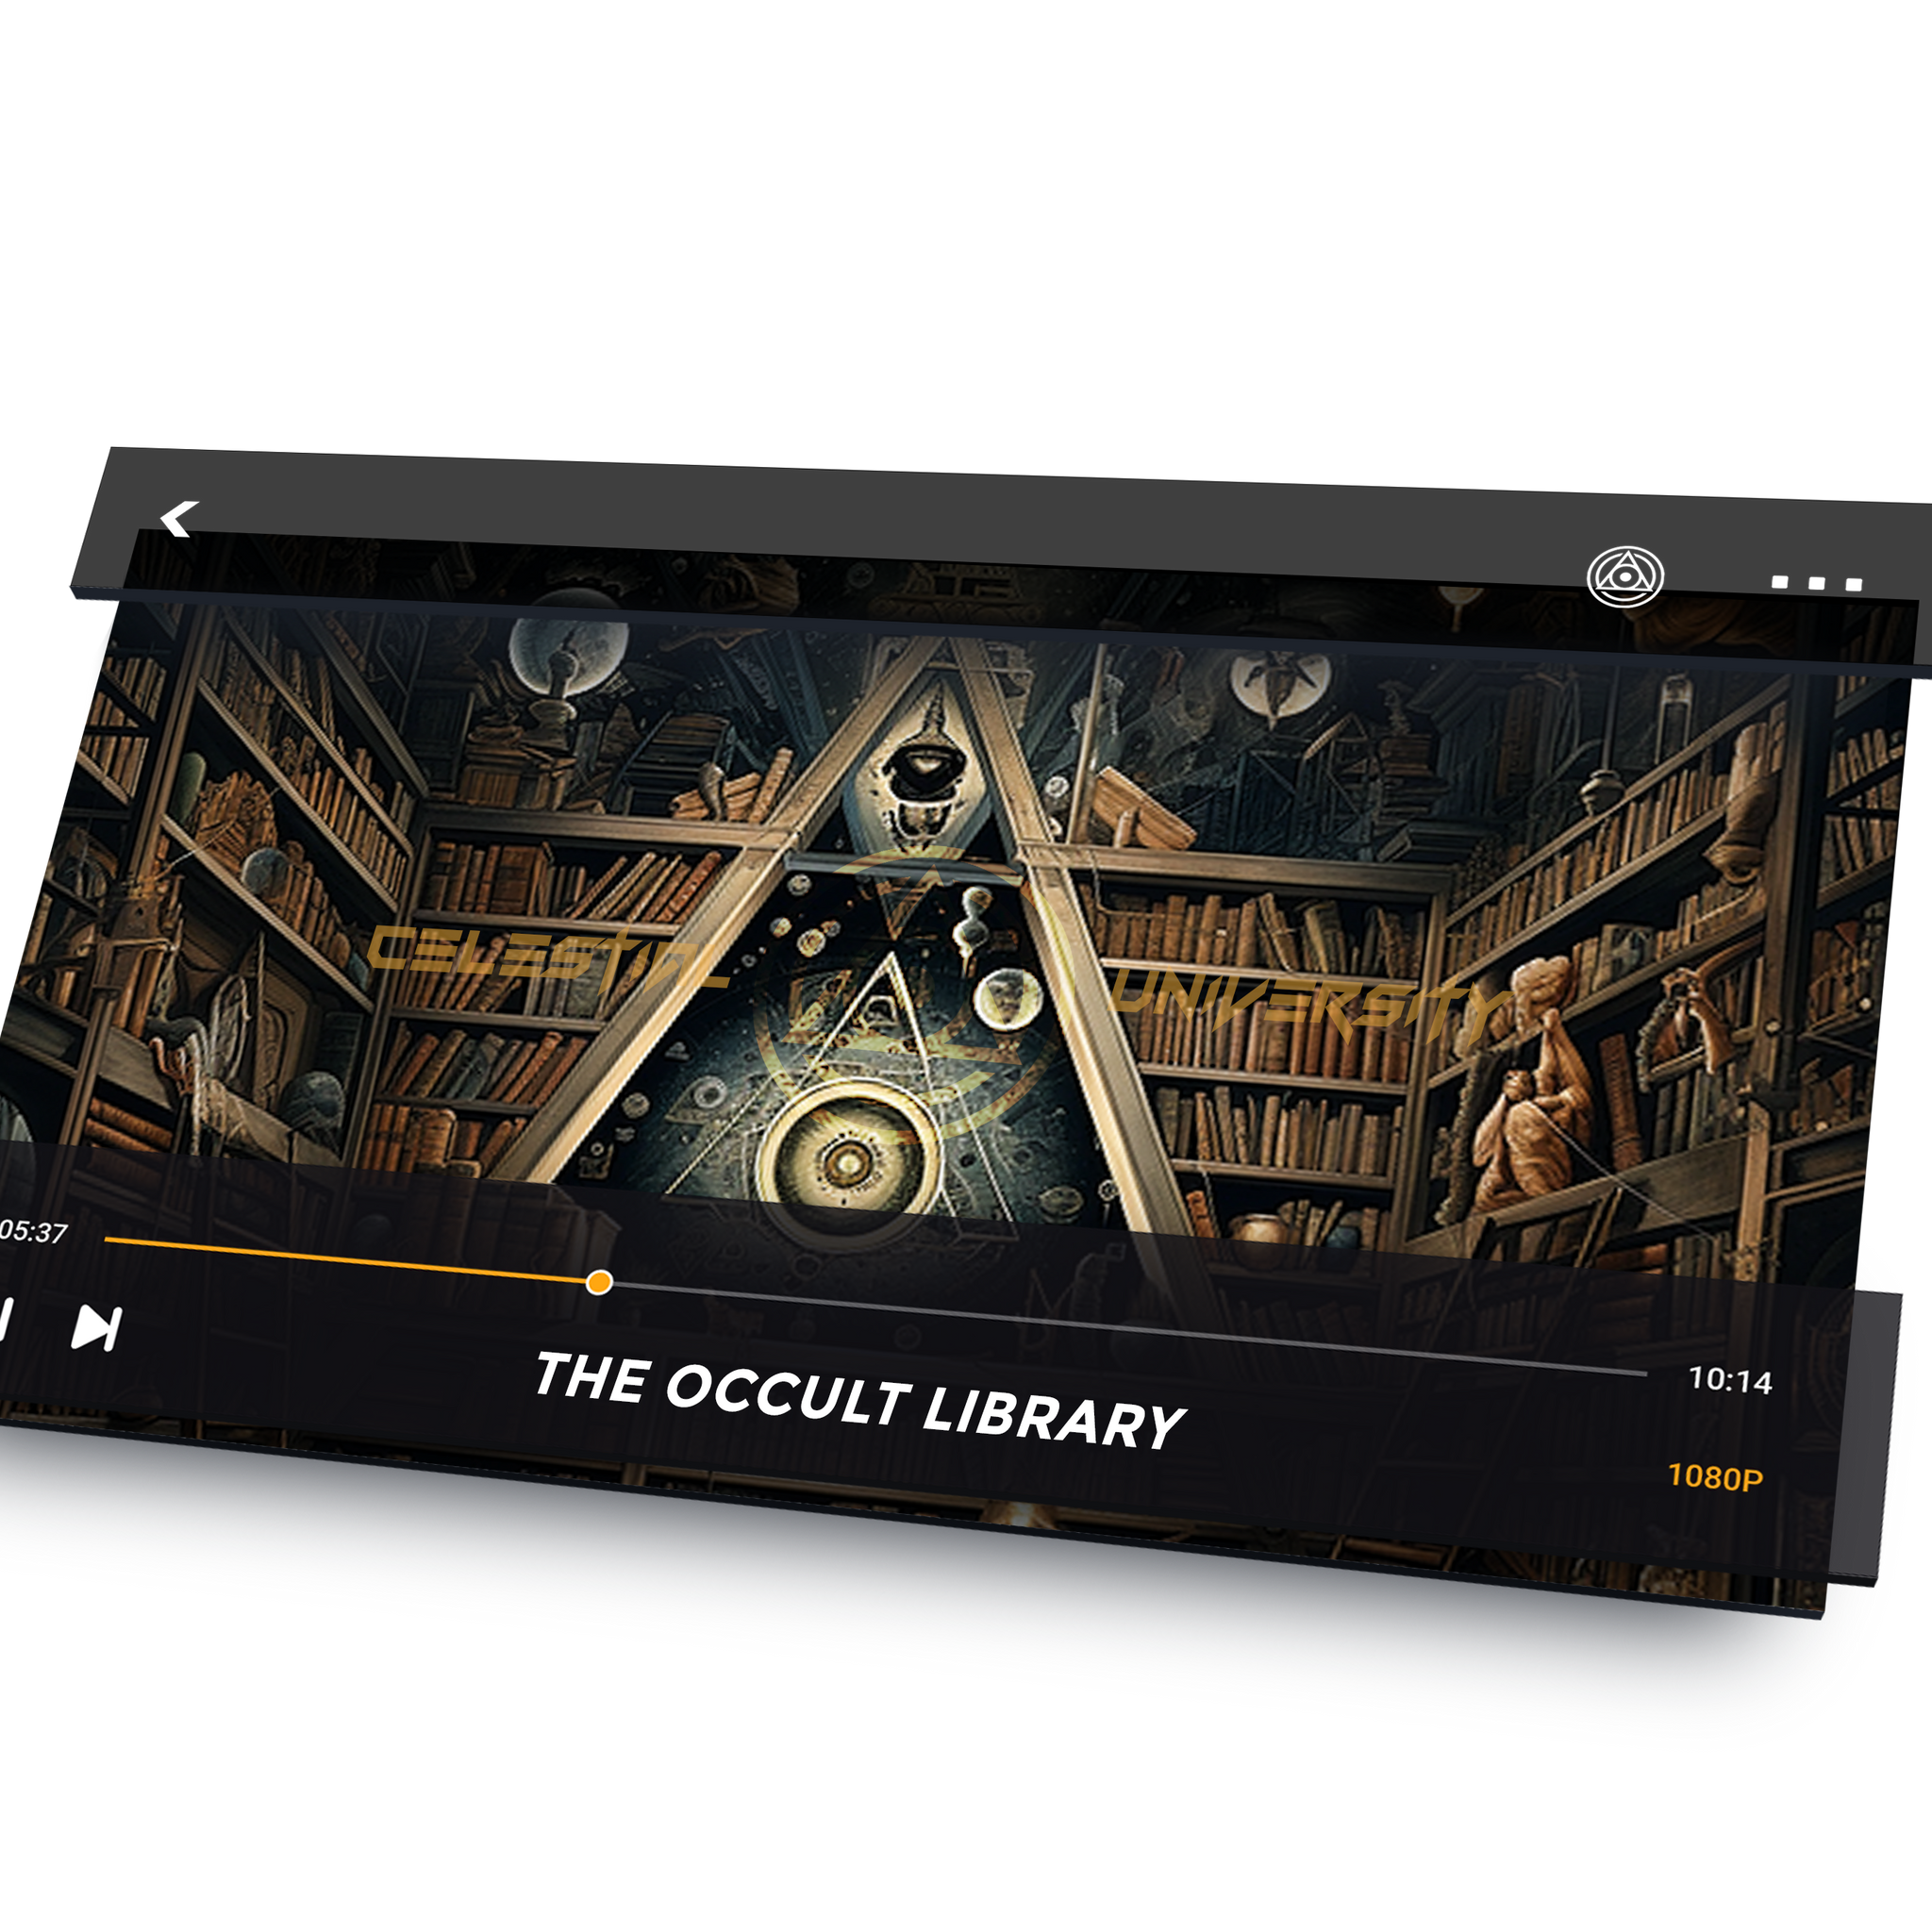 The Occult Library